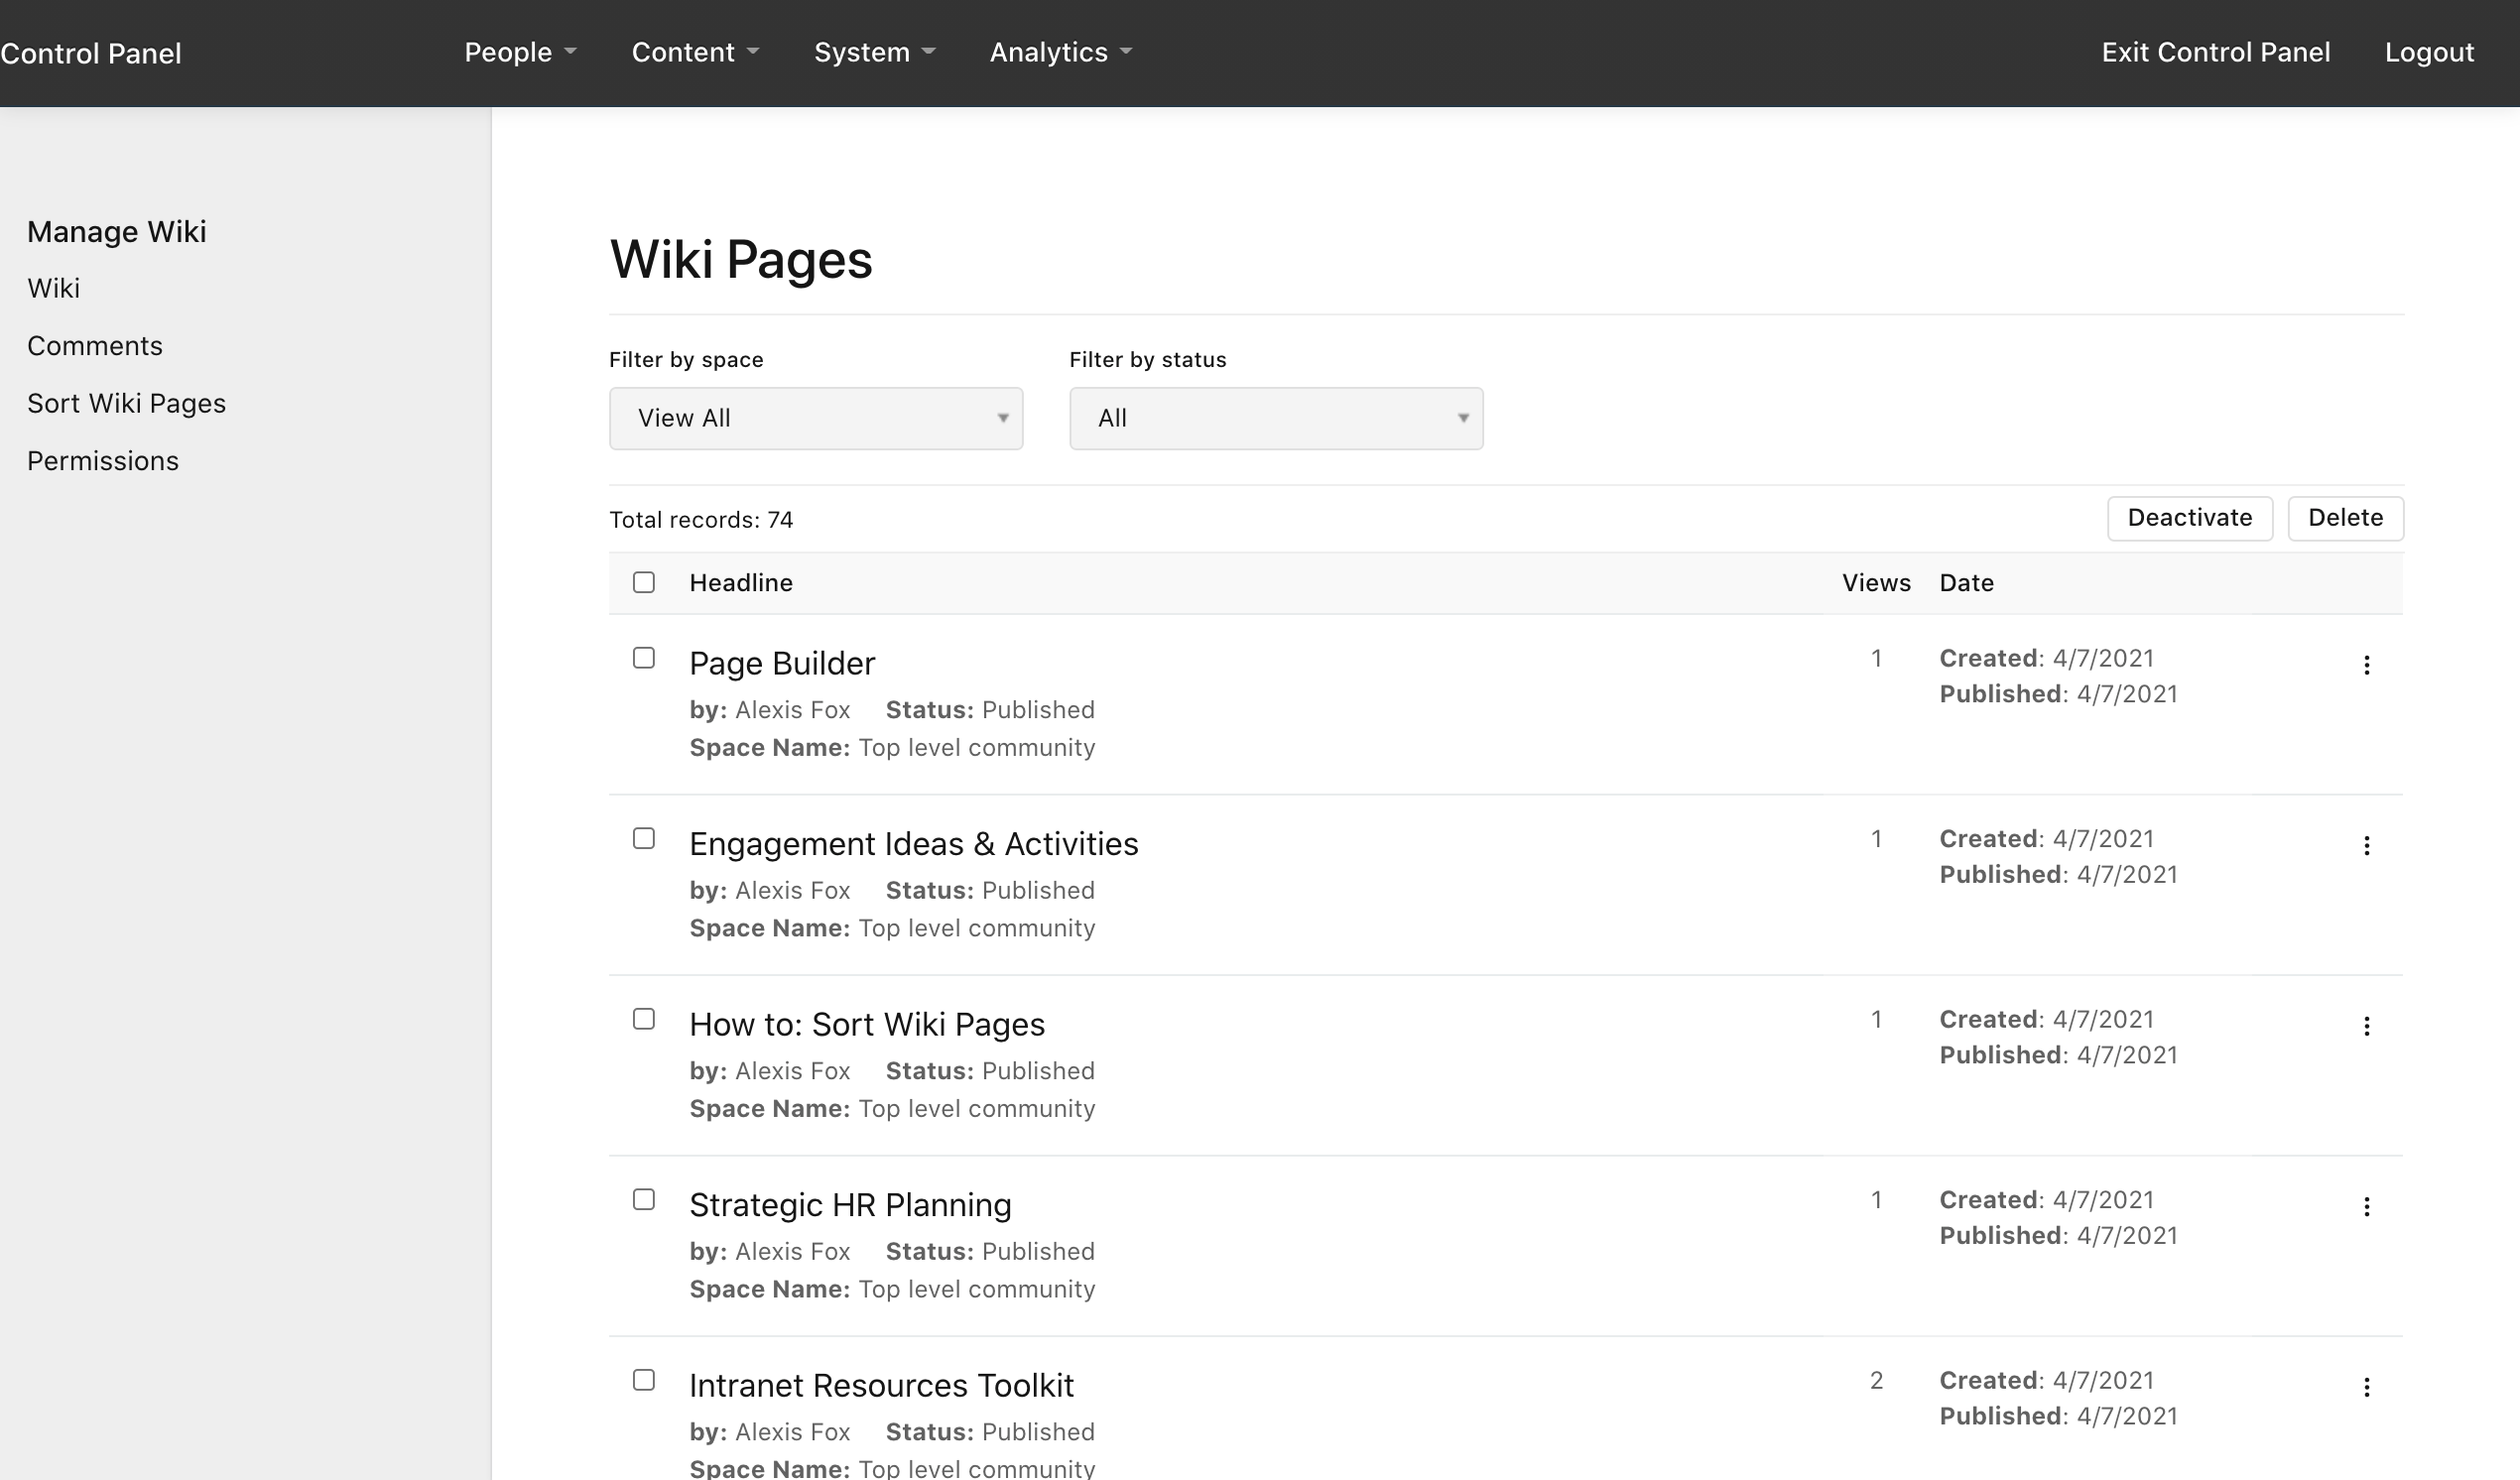 Control Panel > Content > Wiki